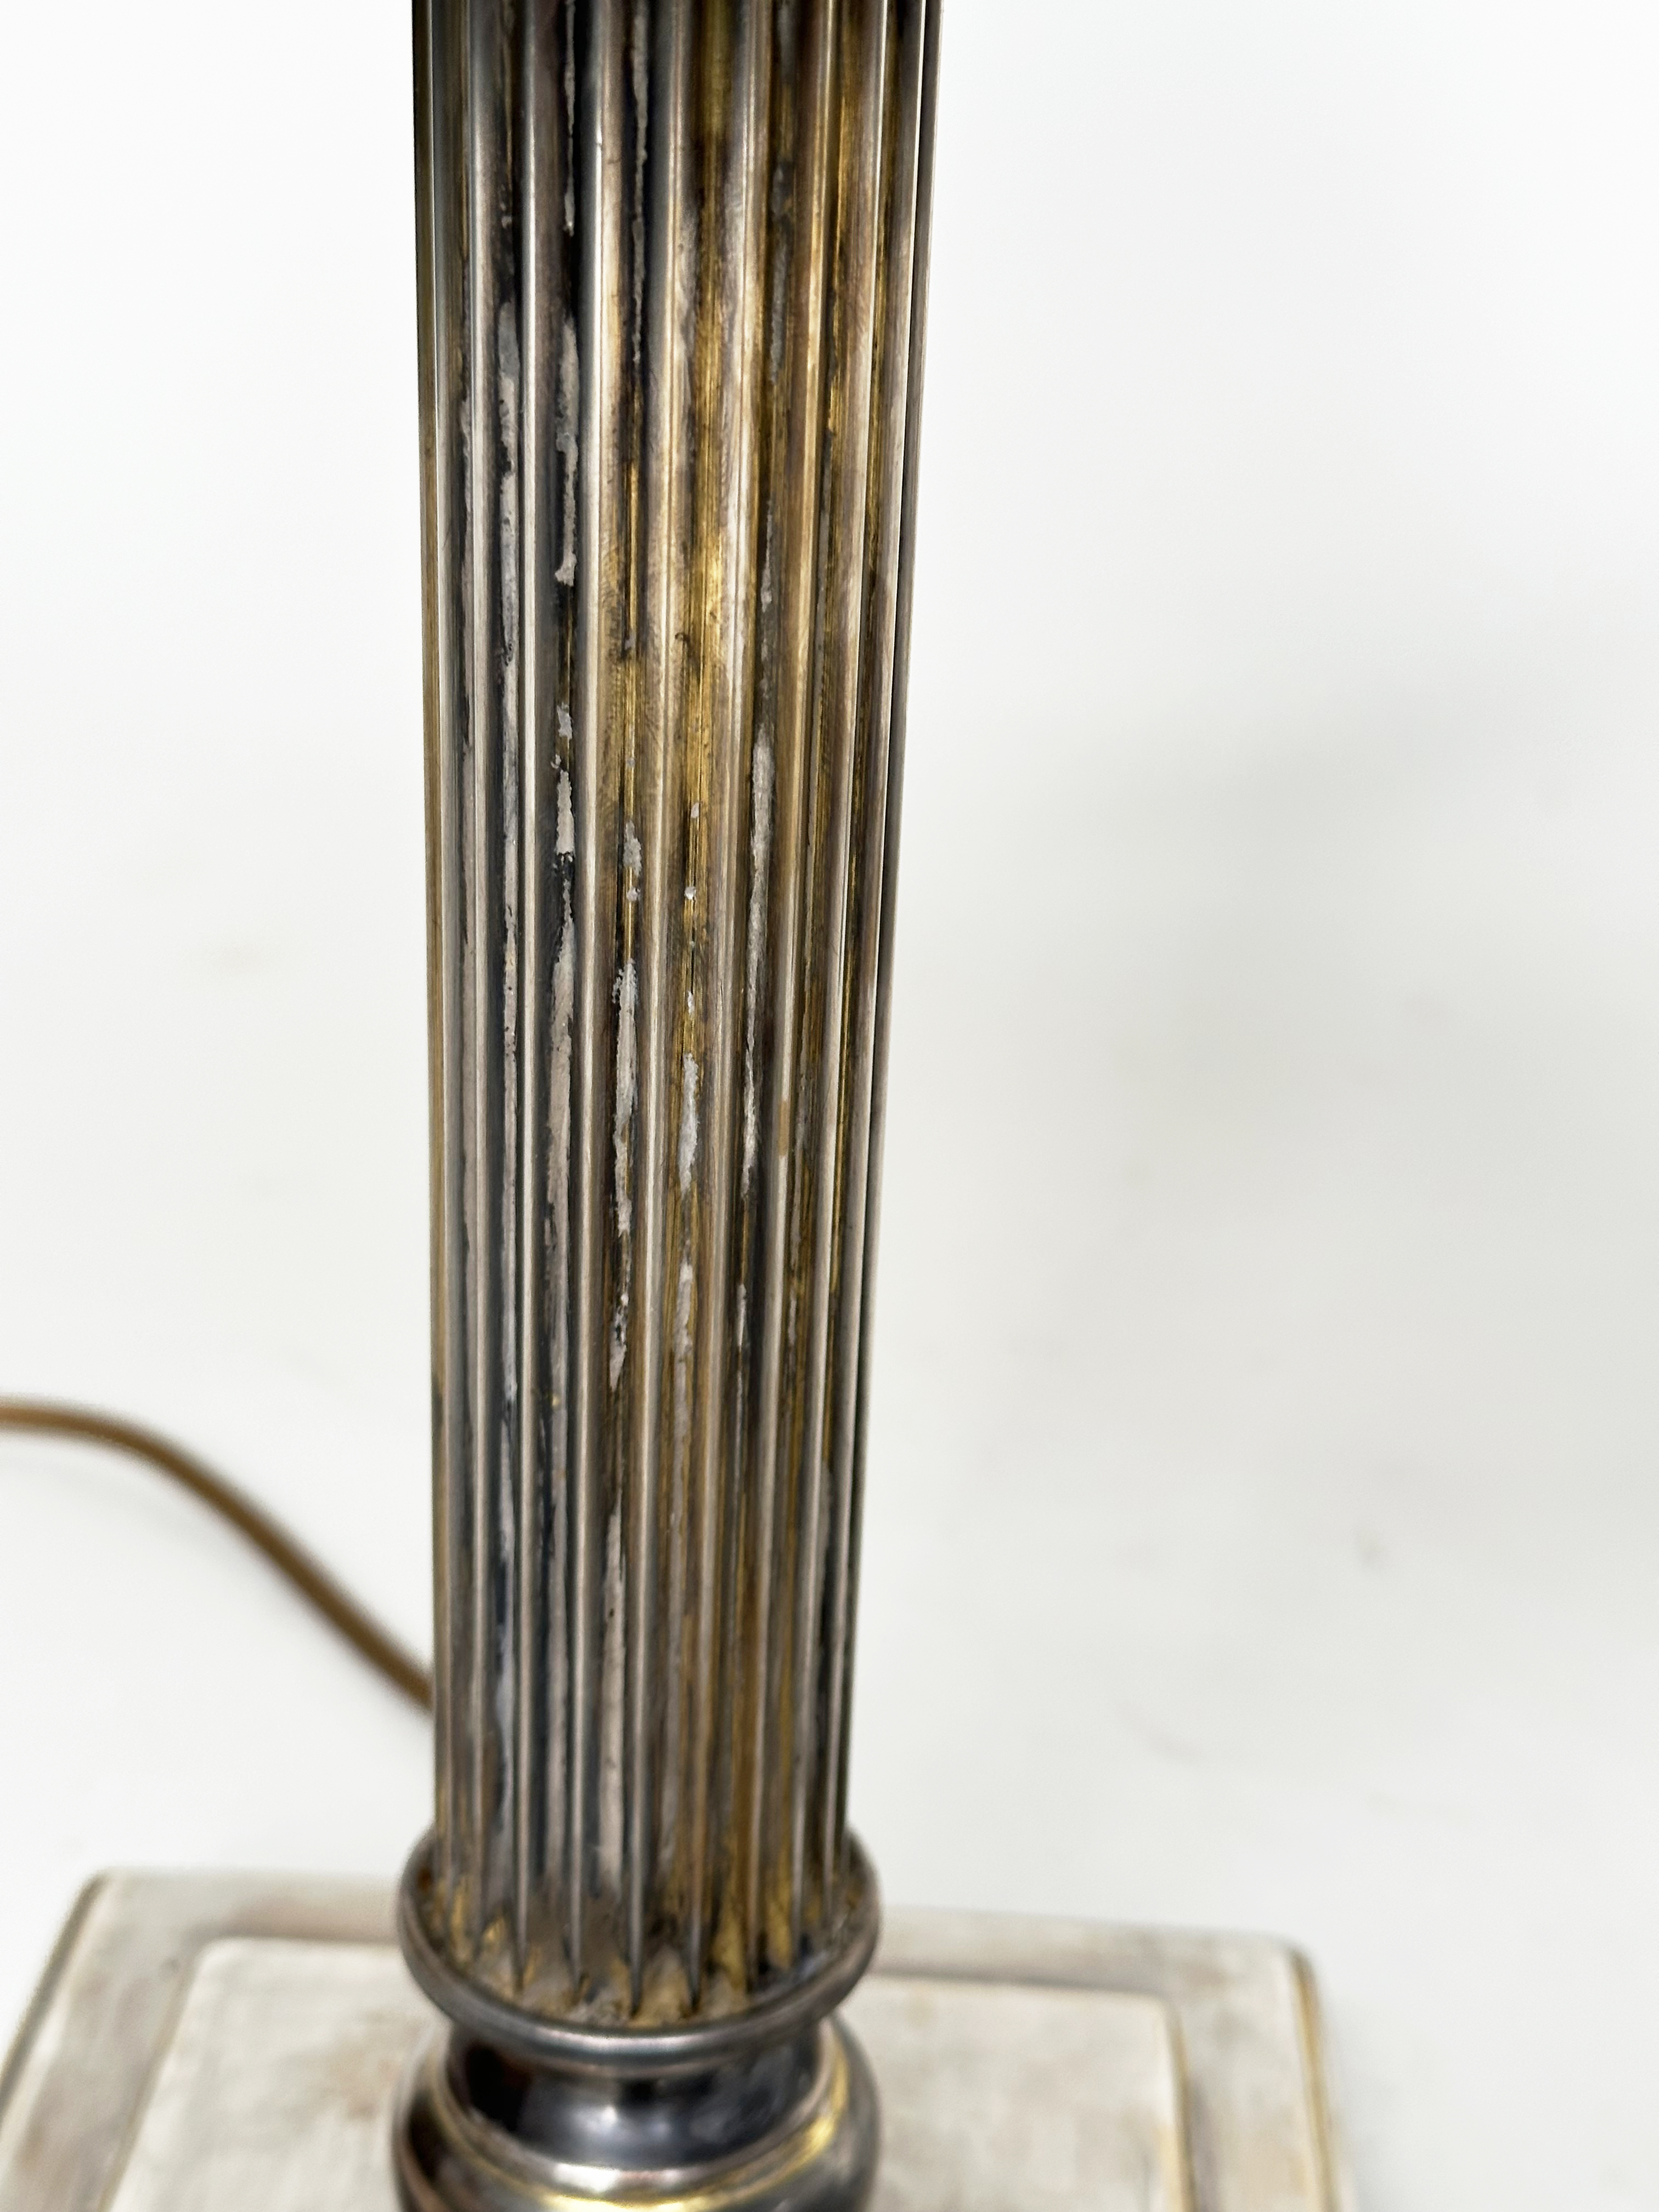 TABLE LAMPS, a pair, silvered metal each with reeded column, and square bases (with shades), 66cm H. - Image 5 of 6